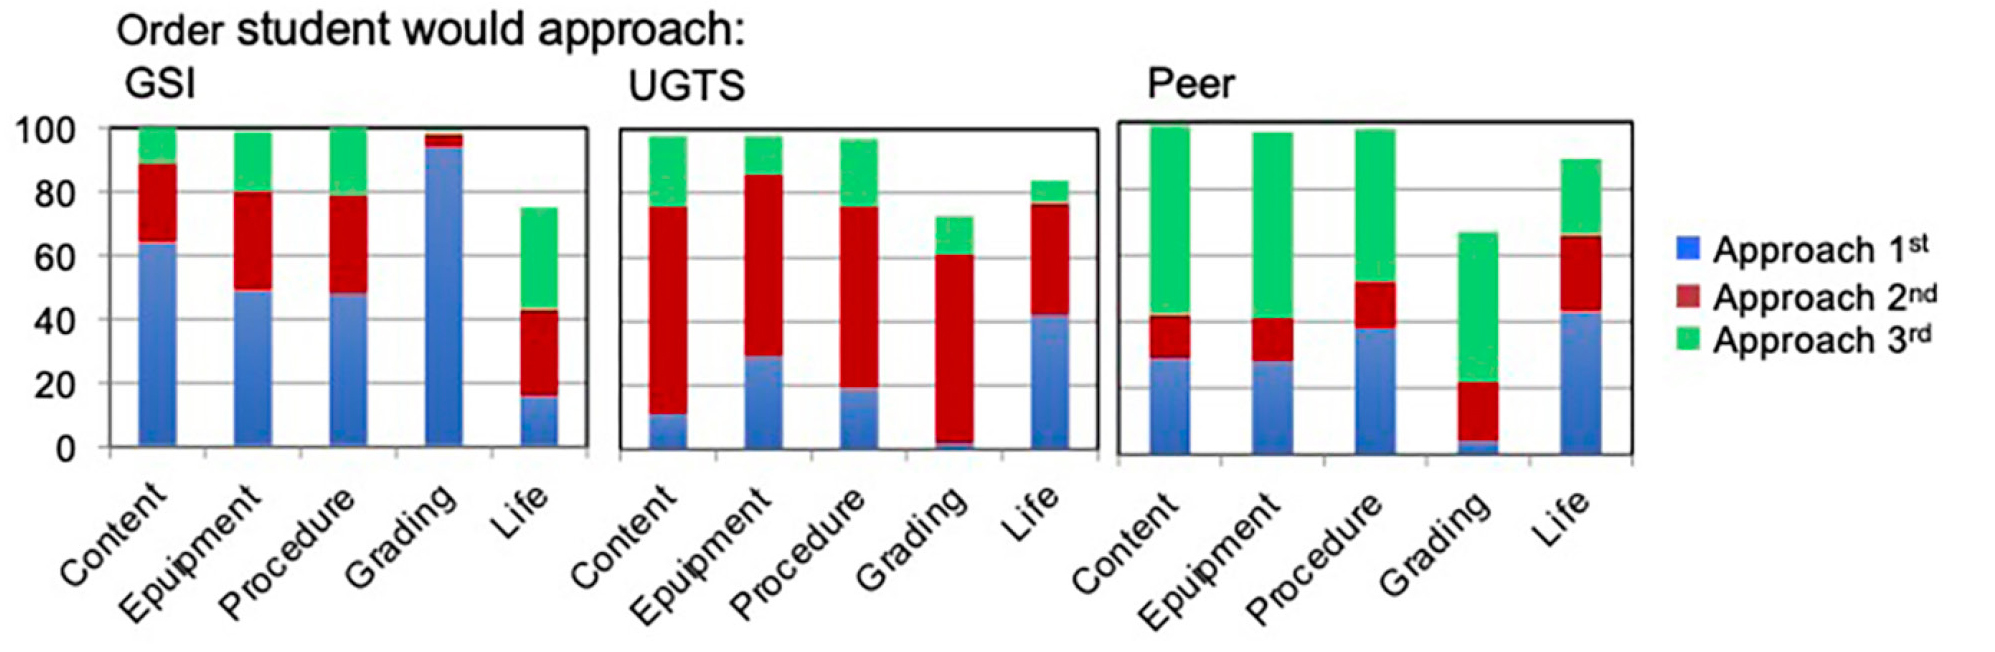 Figure 2 Student responses for the order they would approach GSI (left chart), UGTS (middle chart), or peer (right chart) with certain types of questions. The data represents responses from 1906 students who completed the survey from all courses with UGTSs.